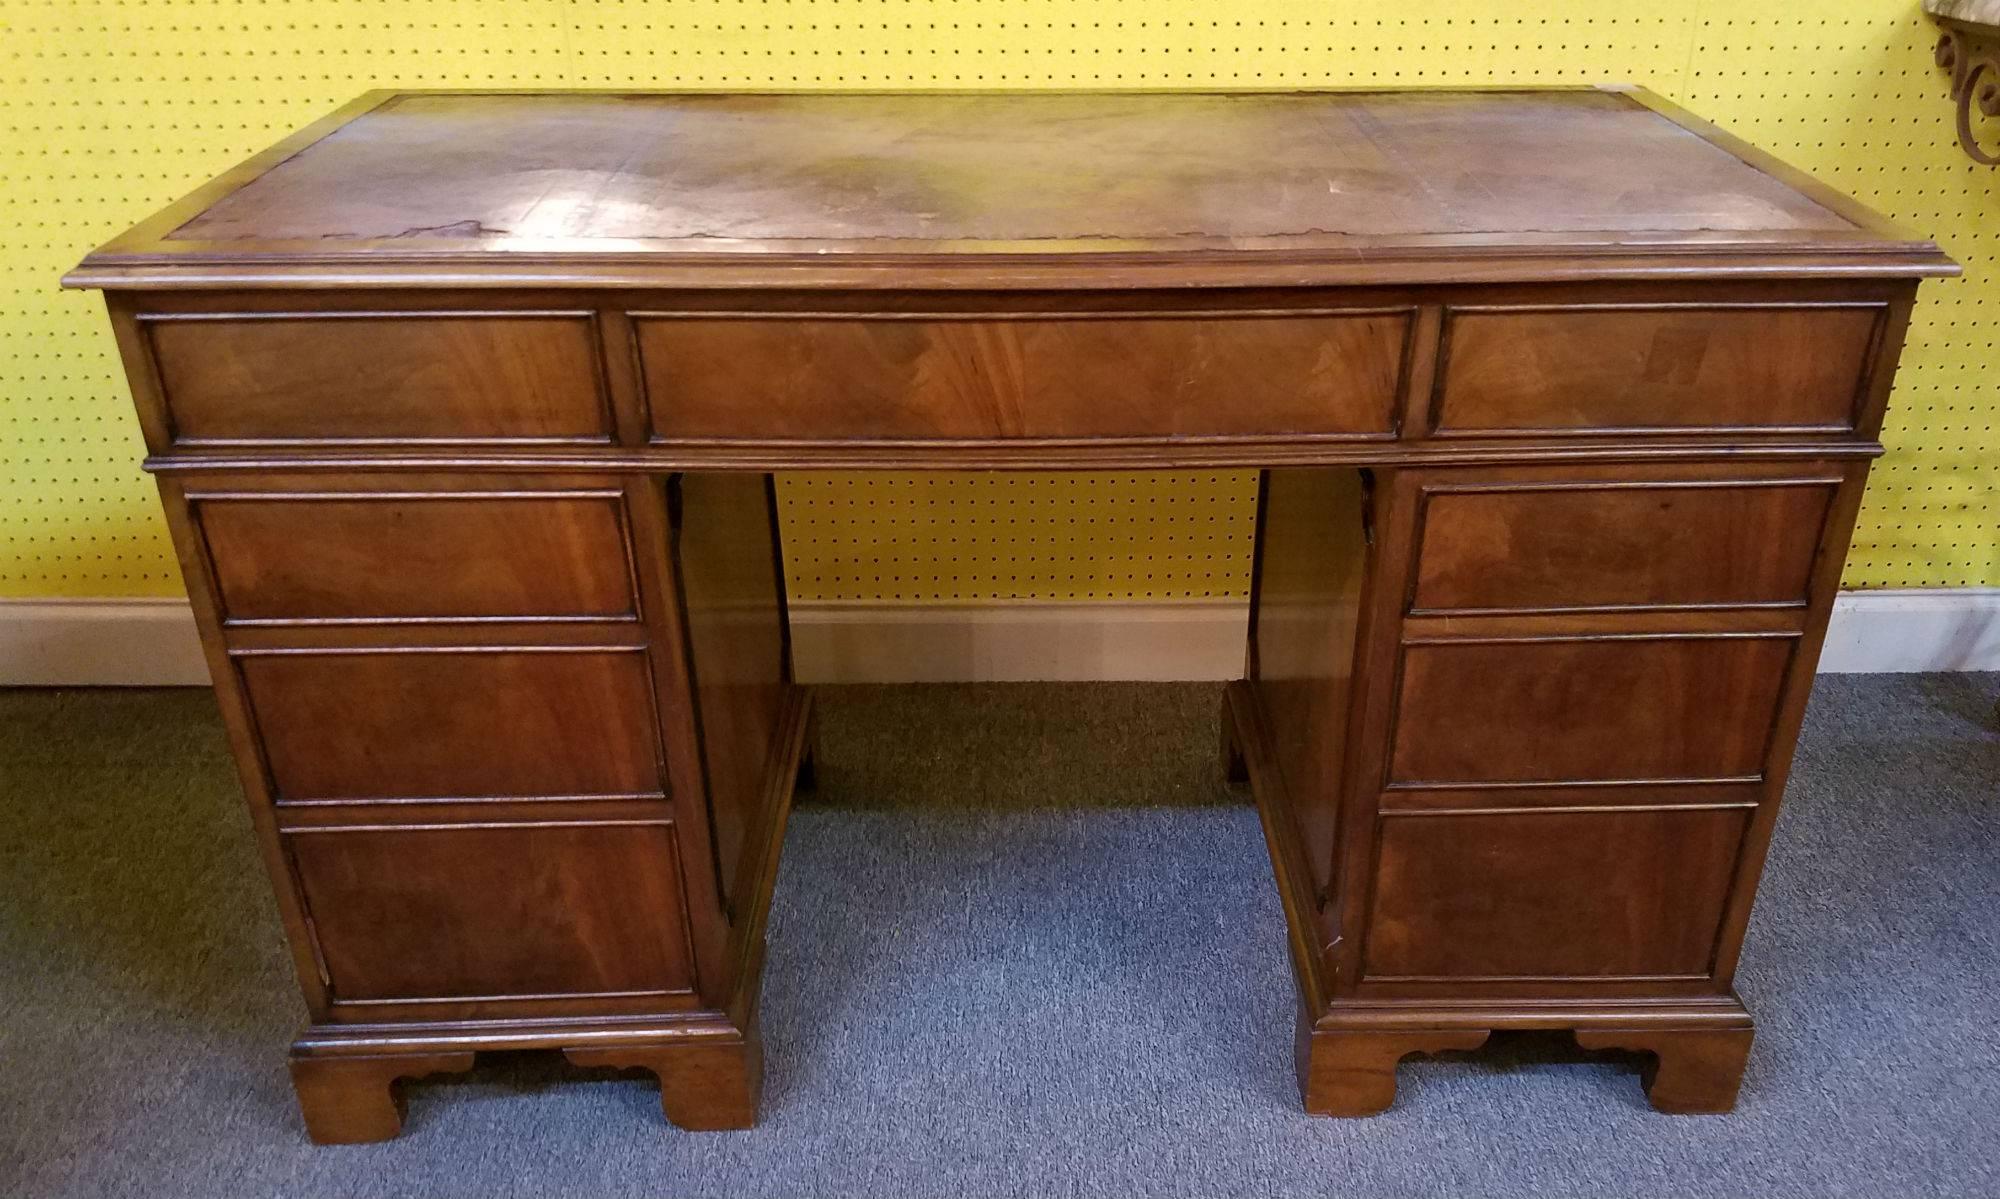 English George III style mahogany double pedestal desk with rectangular inset leather top above a center frieze drawer flanked by eight drawers on bracket feet. Height: 29.75